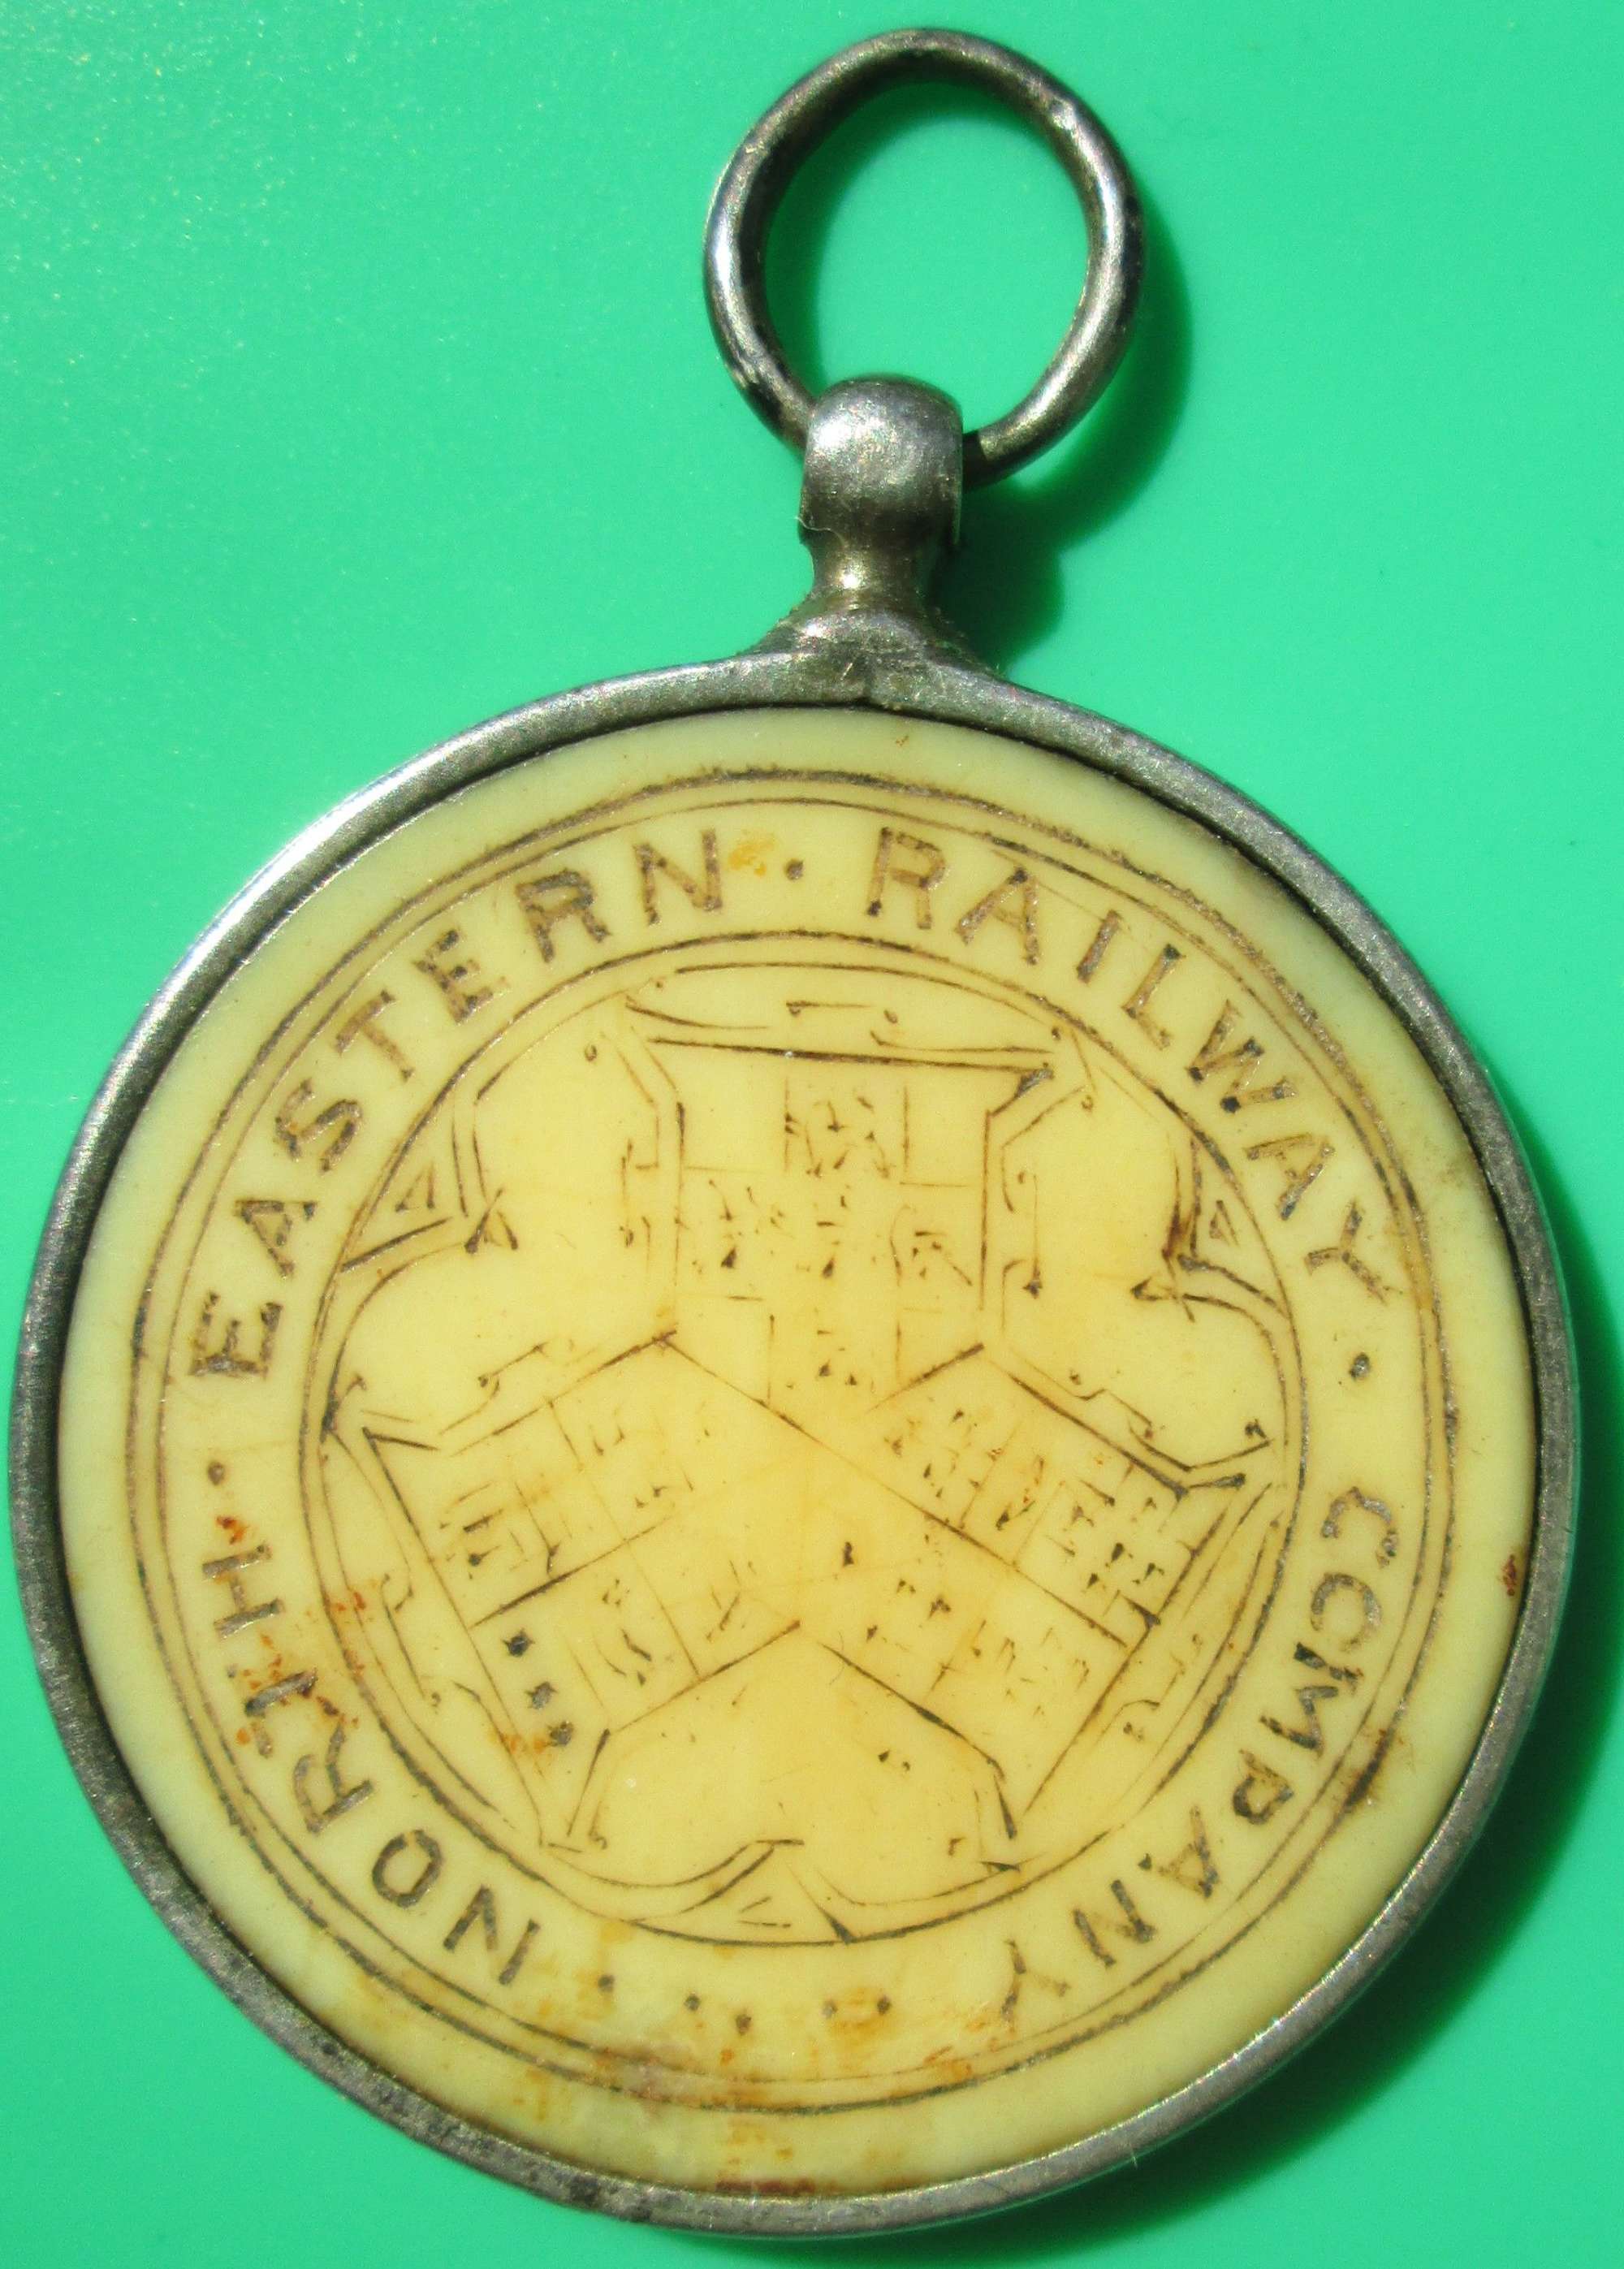 A RARE 1860'S PERIOD NORTH EASTERN RAILWAYS DRIVERS / CONDUCTORS PASS